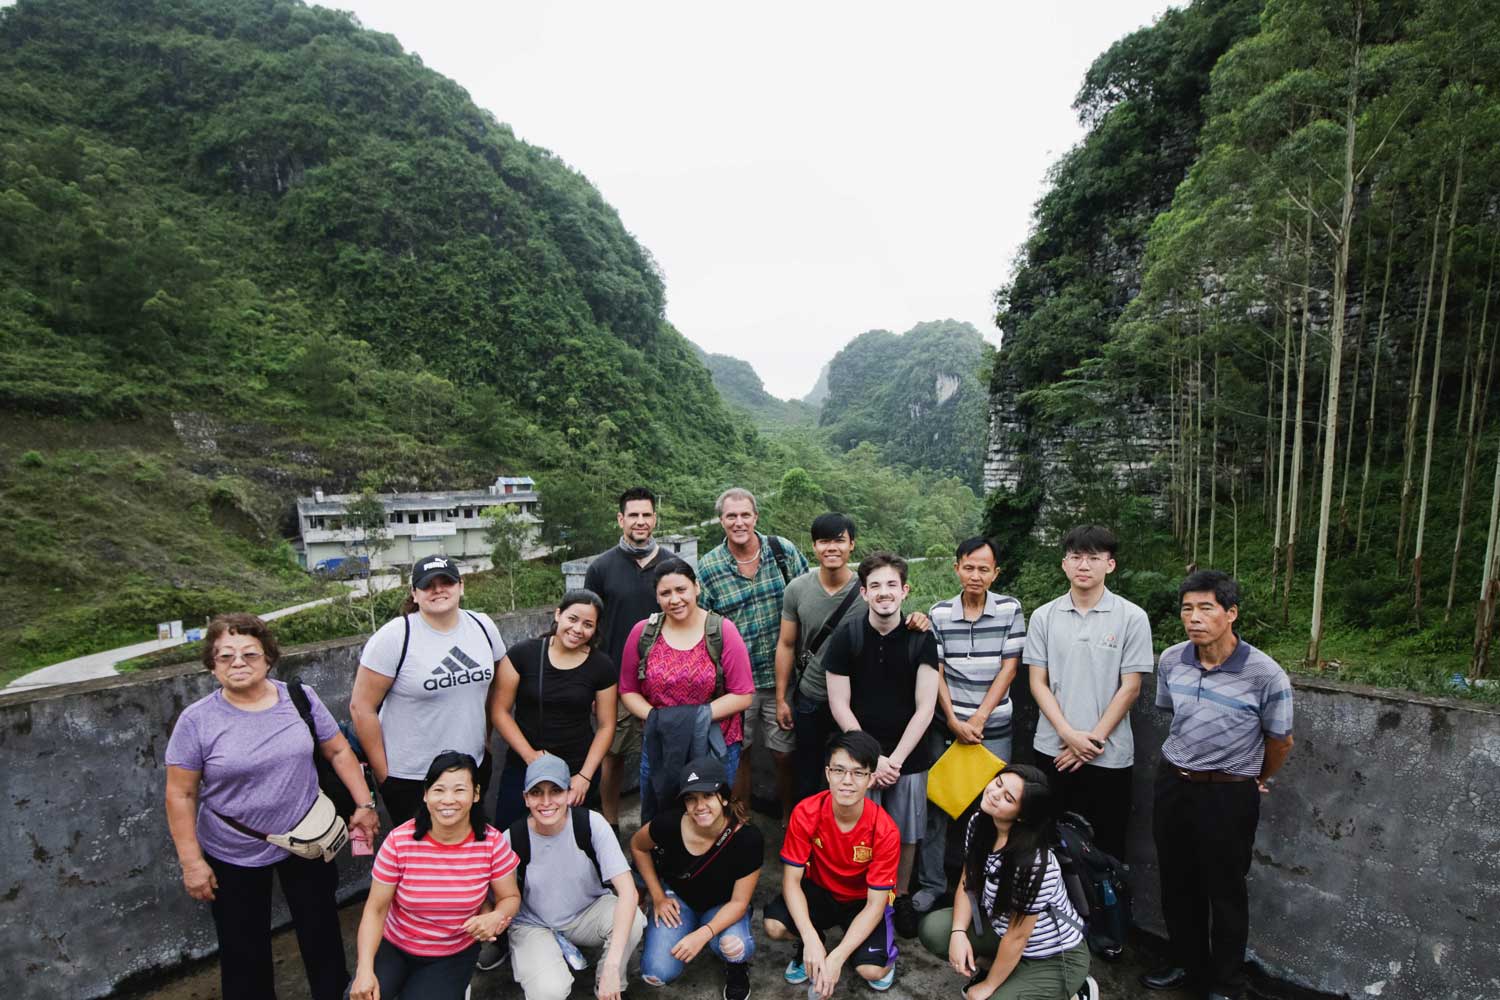 One of our China Missions teams visiting the mountains